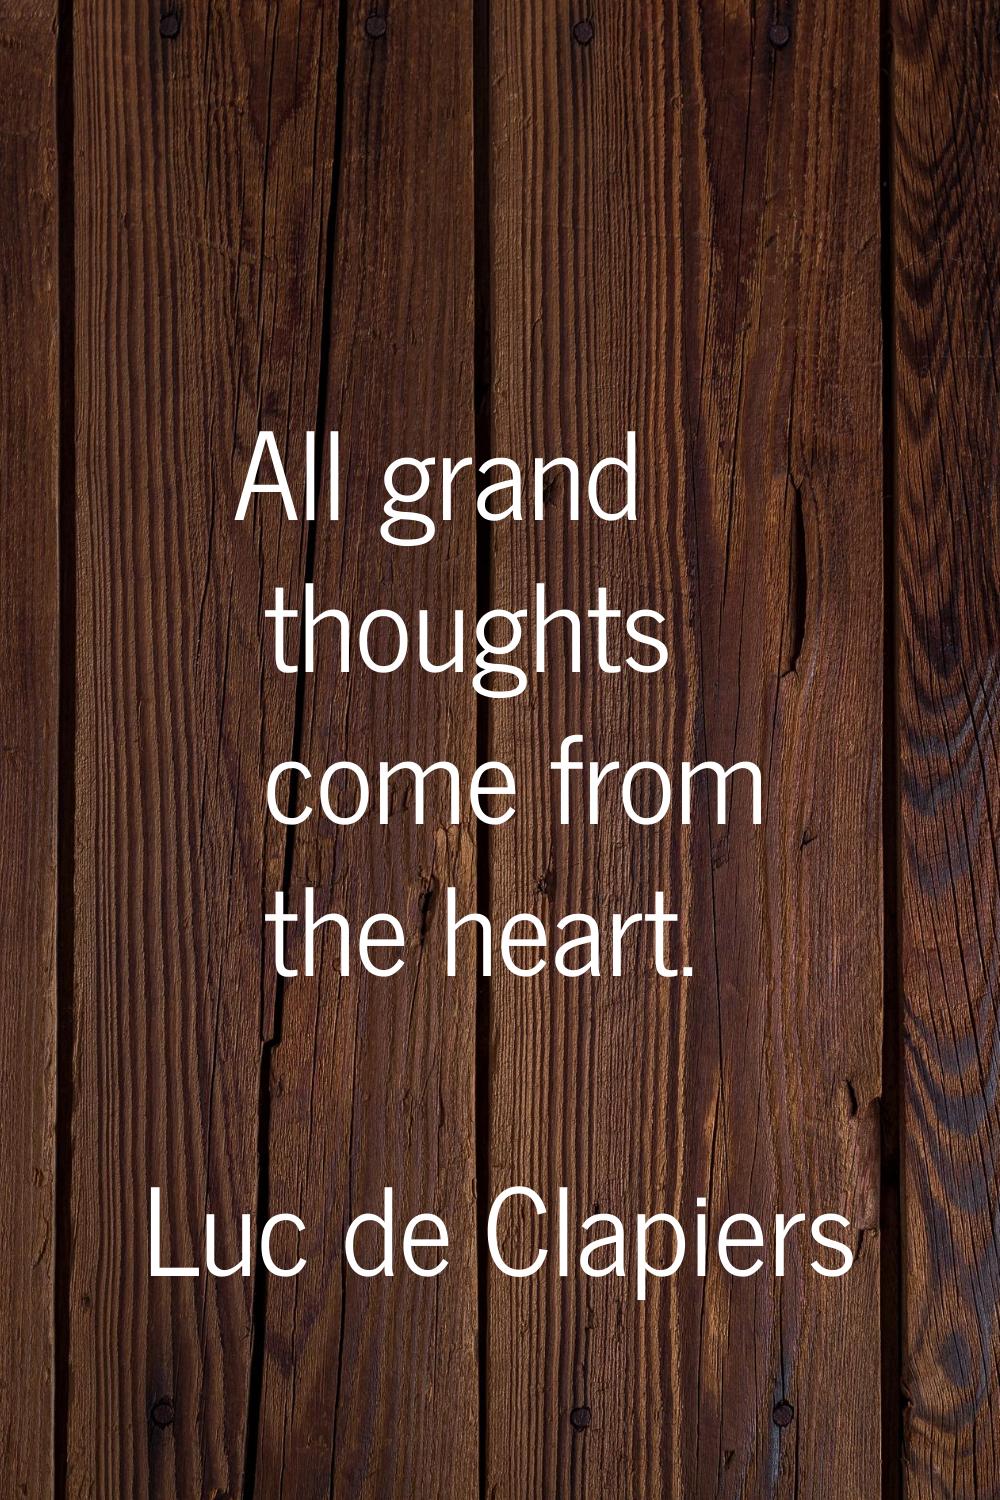 All grand thoughts come from the heart.